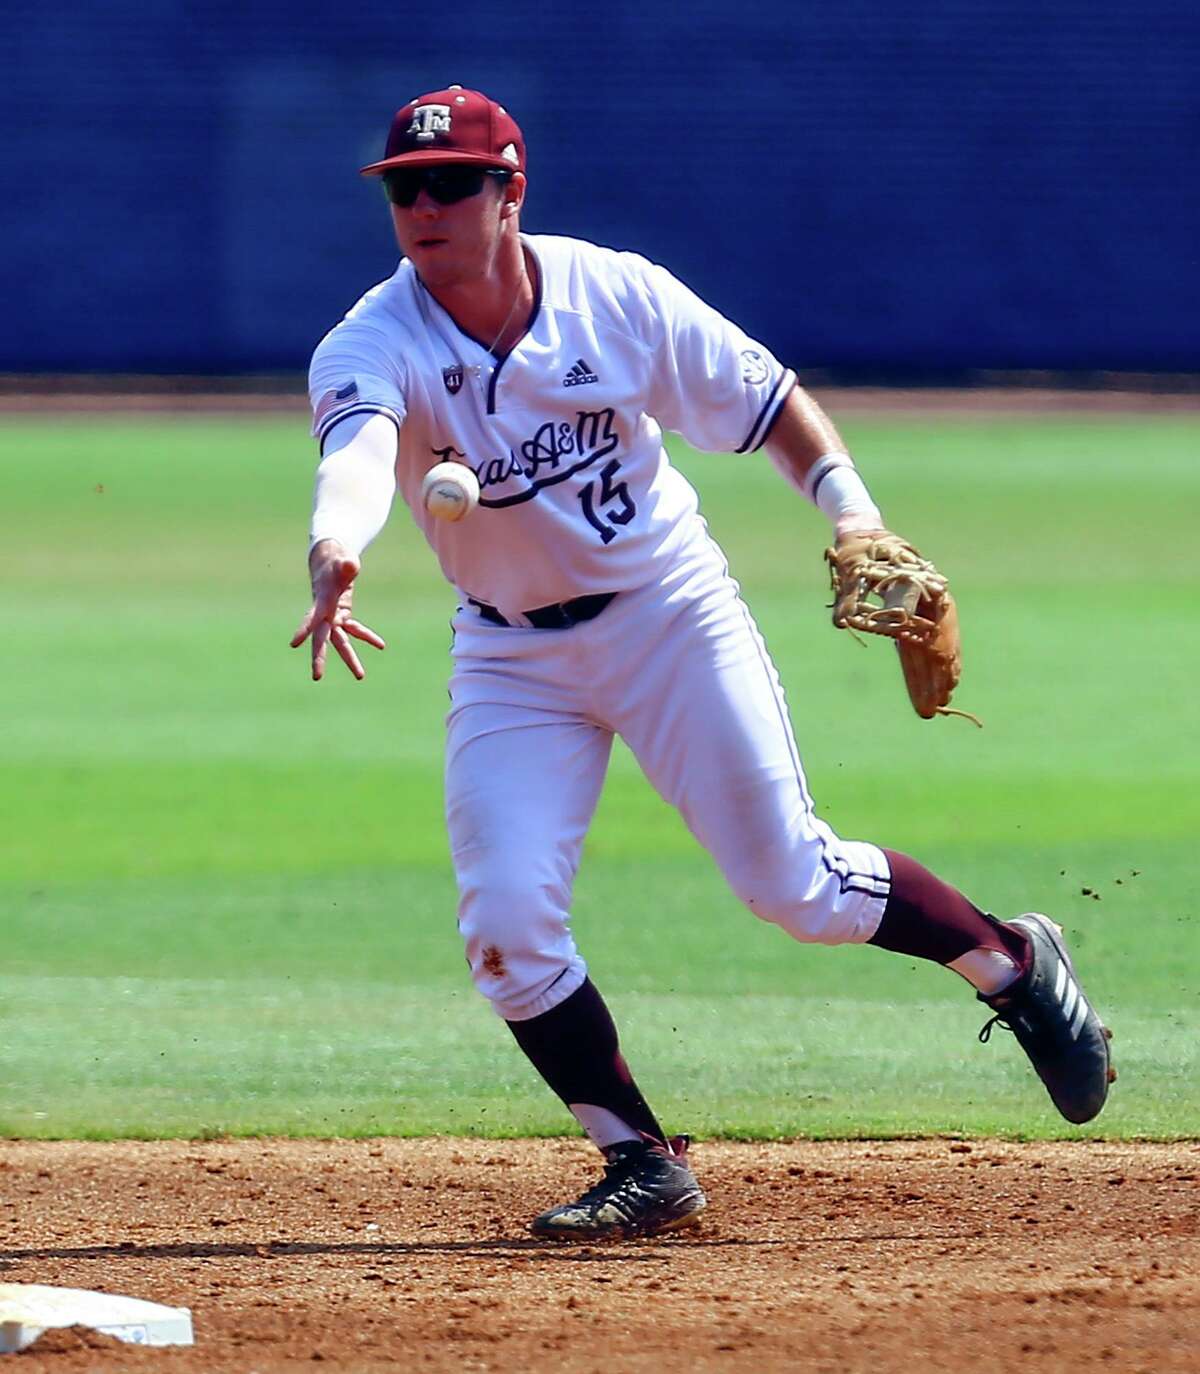 Bryce Blaum and the A&M baseball team have moved indoors to continue preparing for the season.